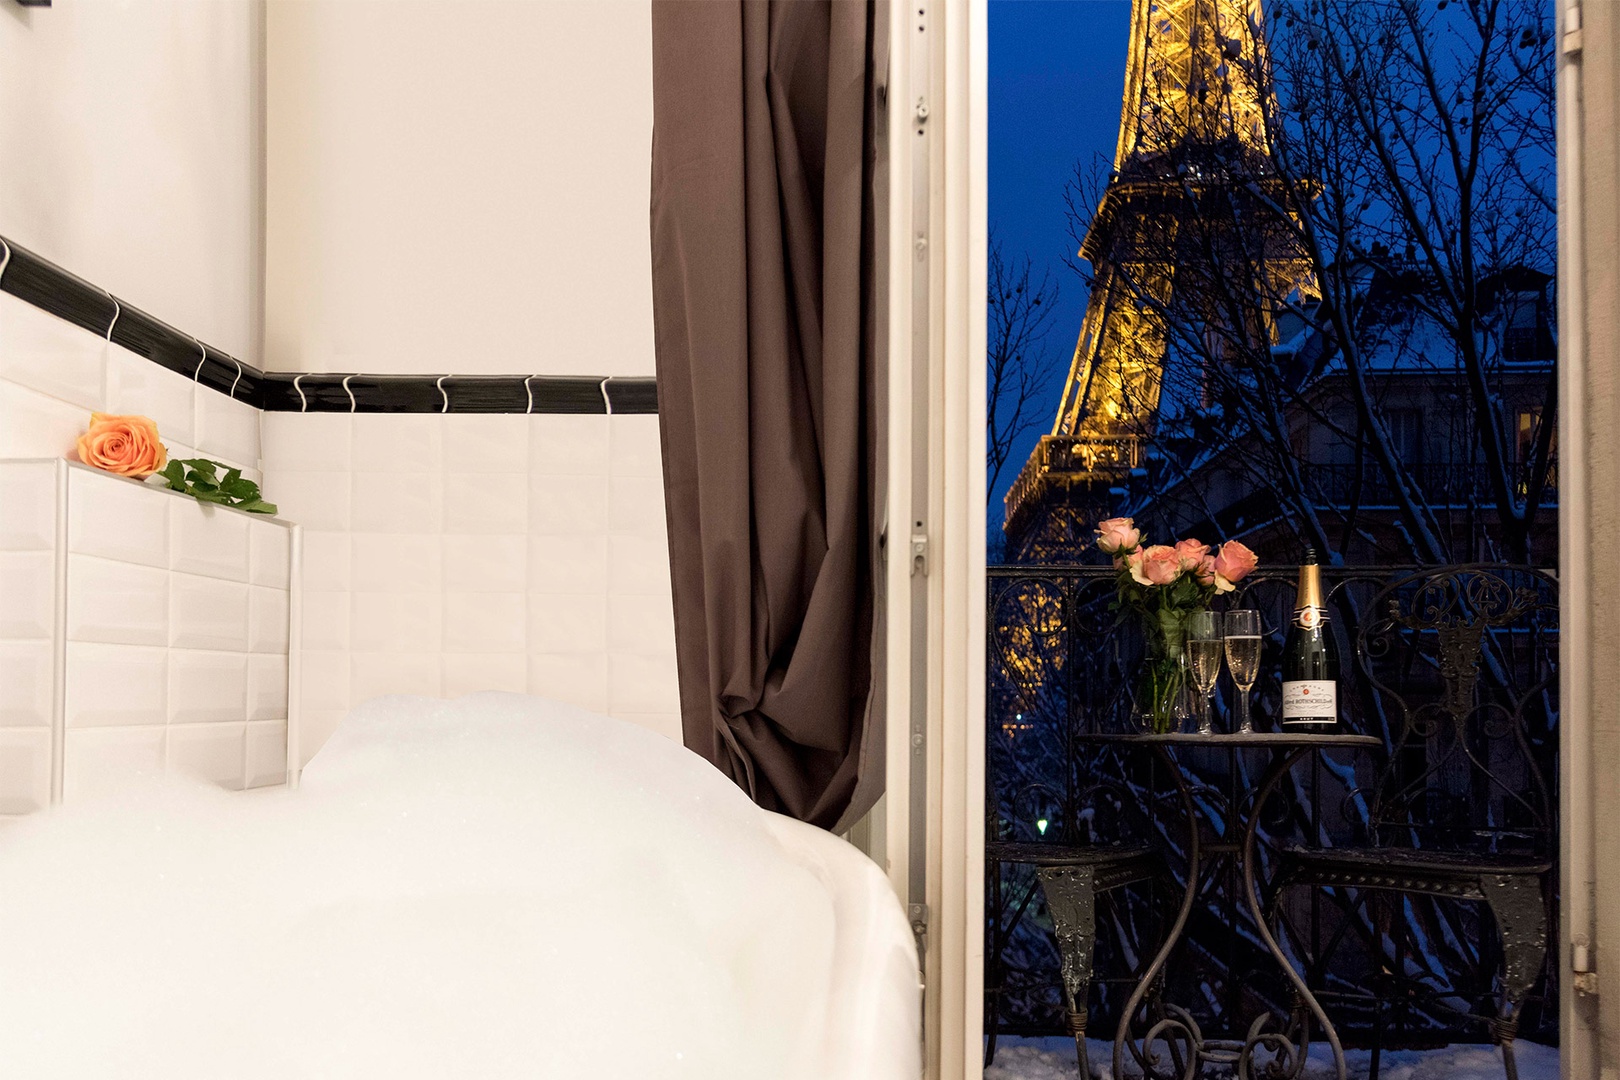 Welcome to the most romantic bathroom in Paris!